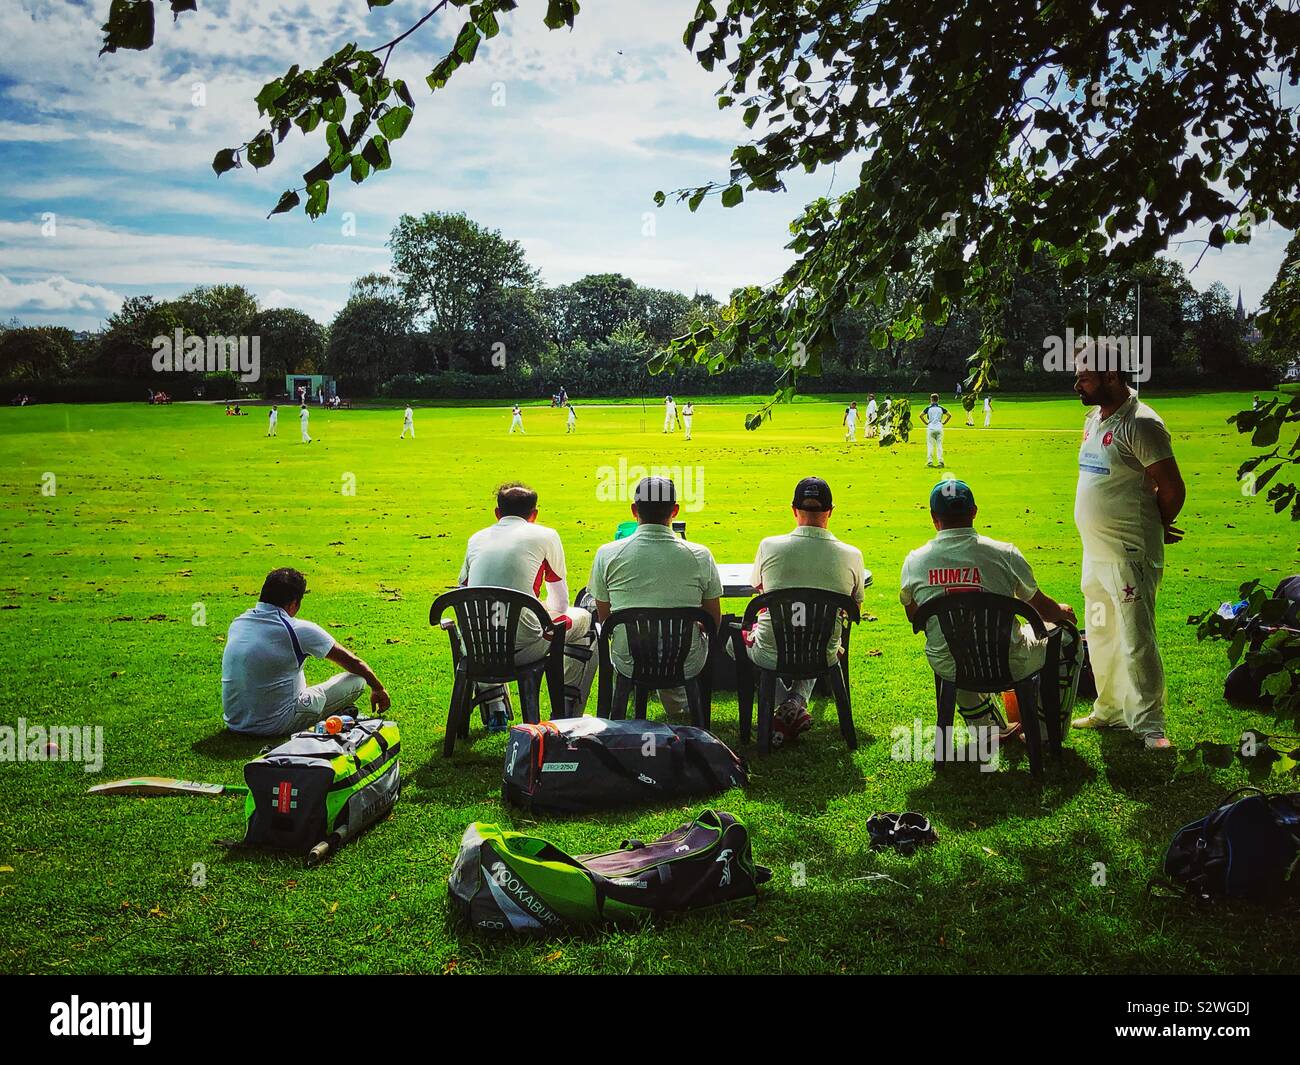 Cricket in the park Stock Photo